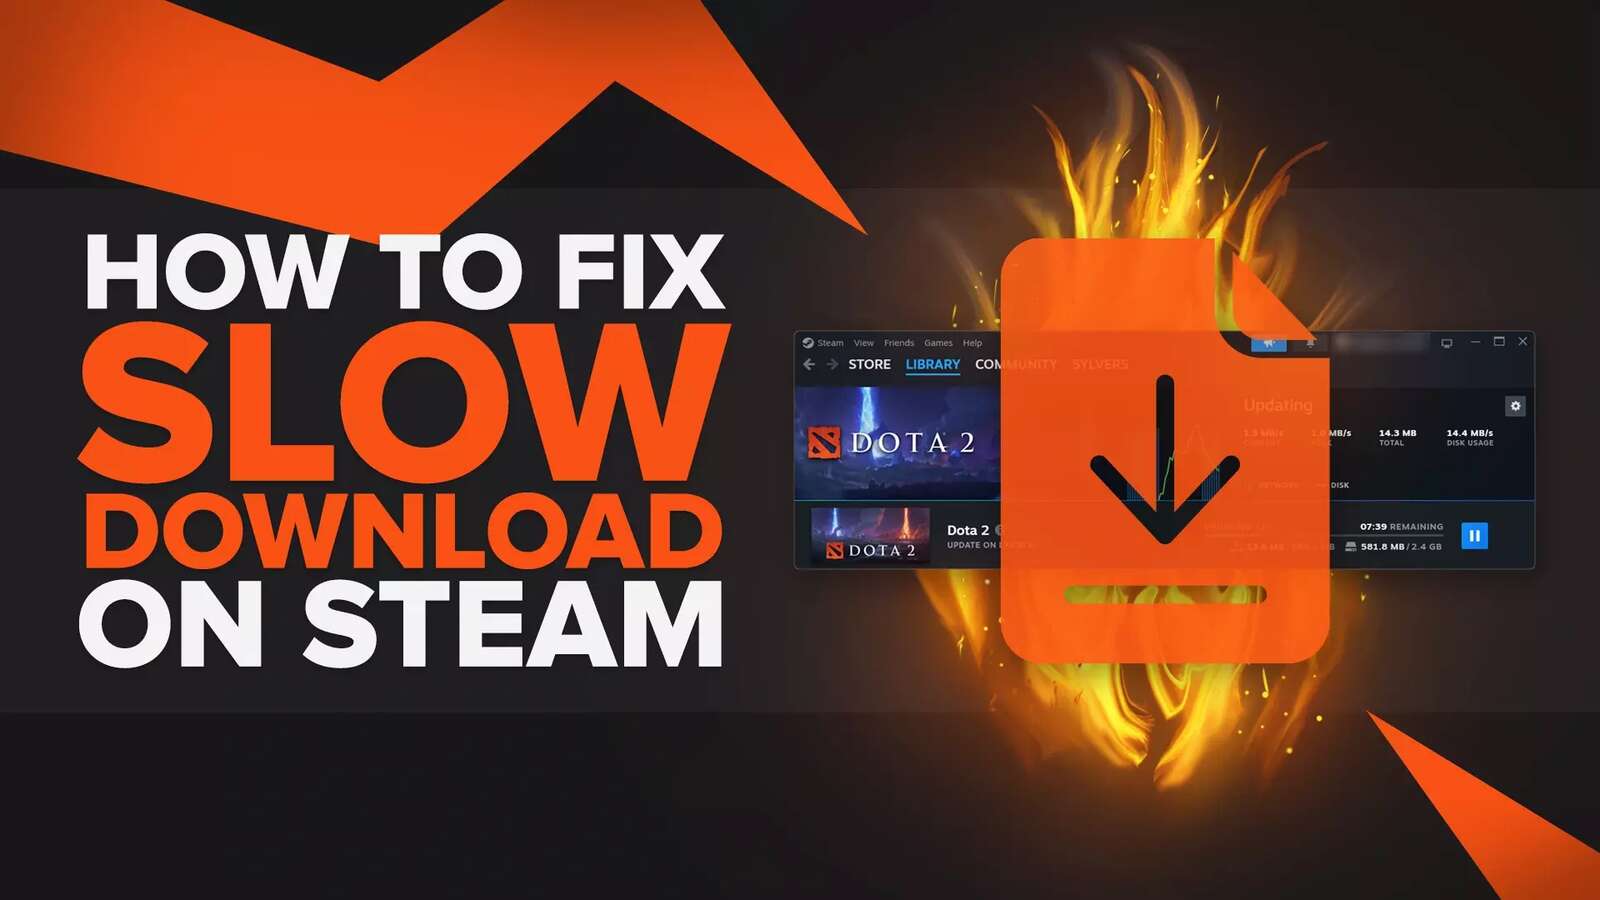 Here's How To Fix Slow Download Speed on Steam [6 Ways]